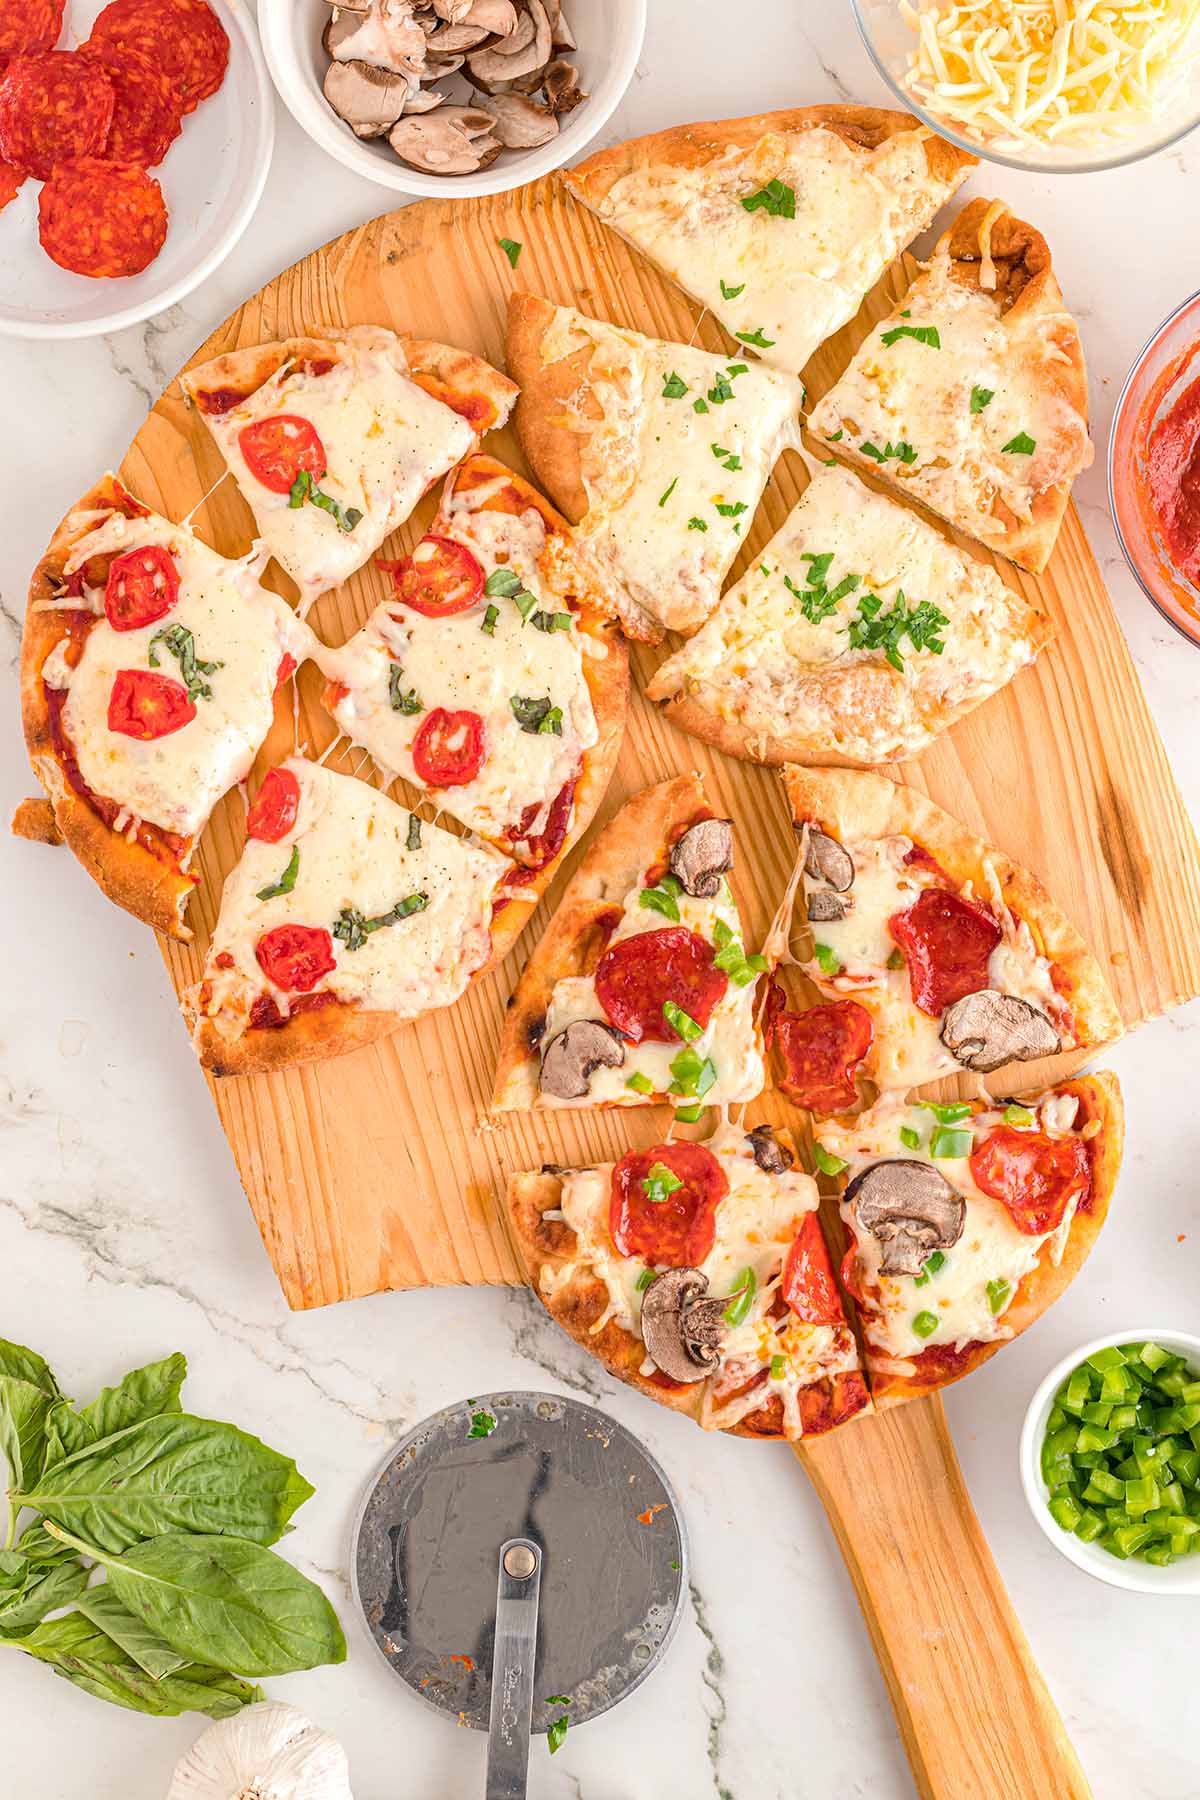 3 Naan Bread Pizza with different toppings cut into slices.